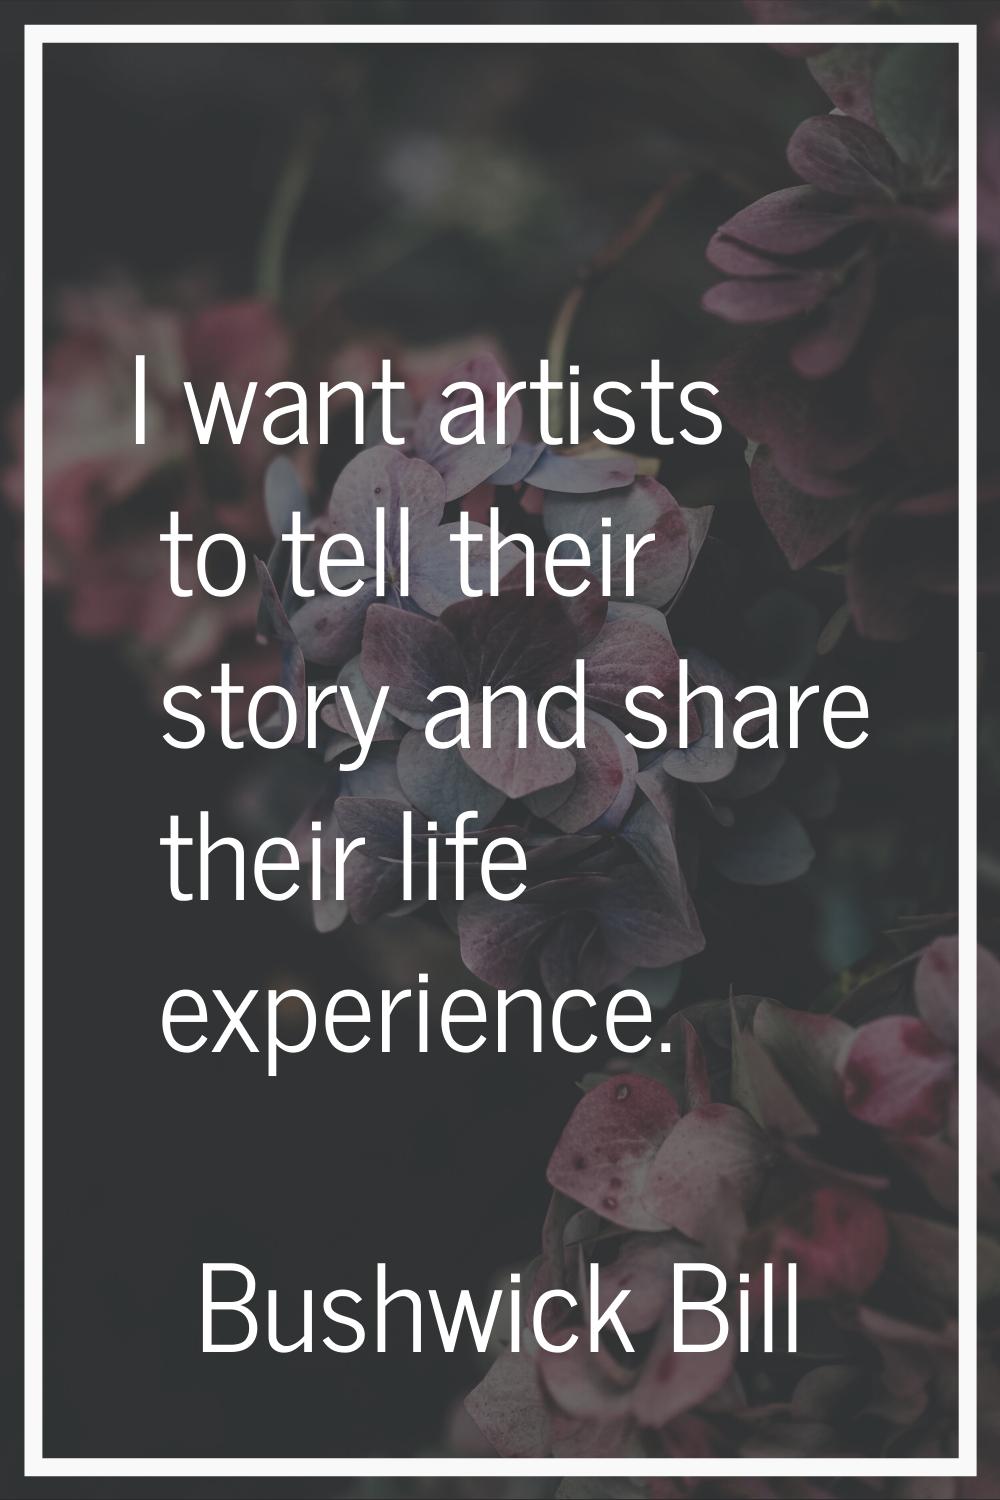 I want artists to tell their story and share their life experience.